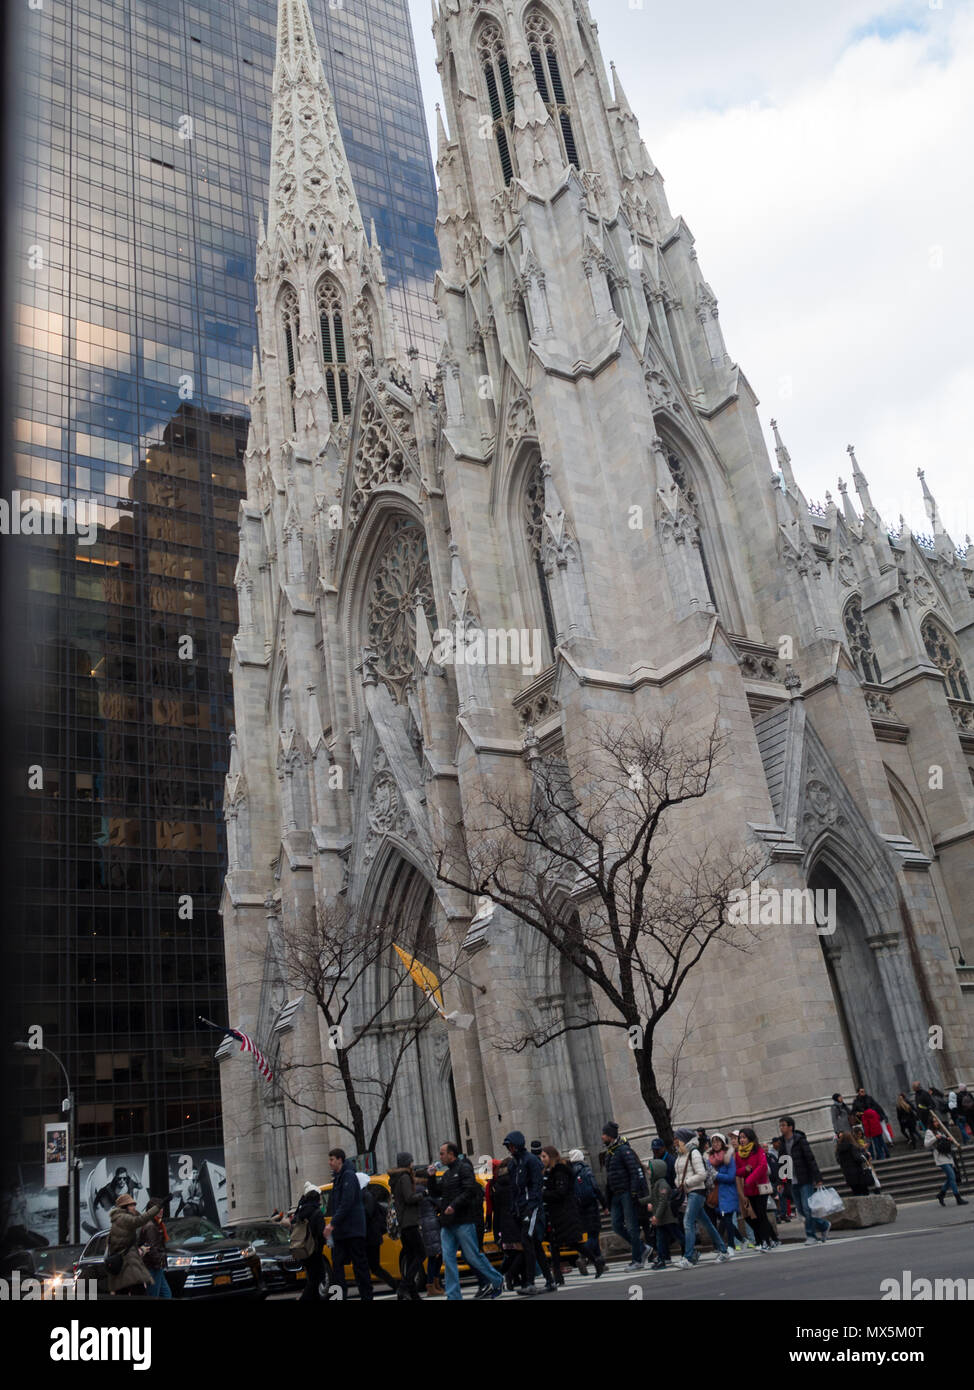 St. Patricks Cathedral on 5th Avenue Stock Photo